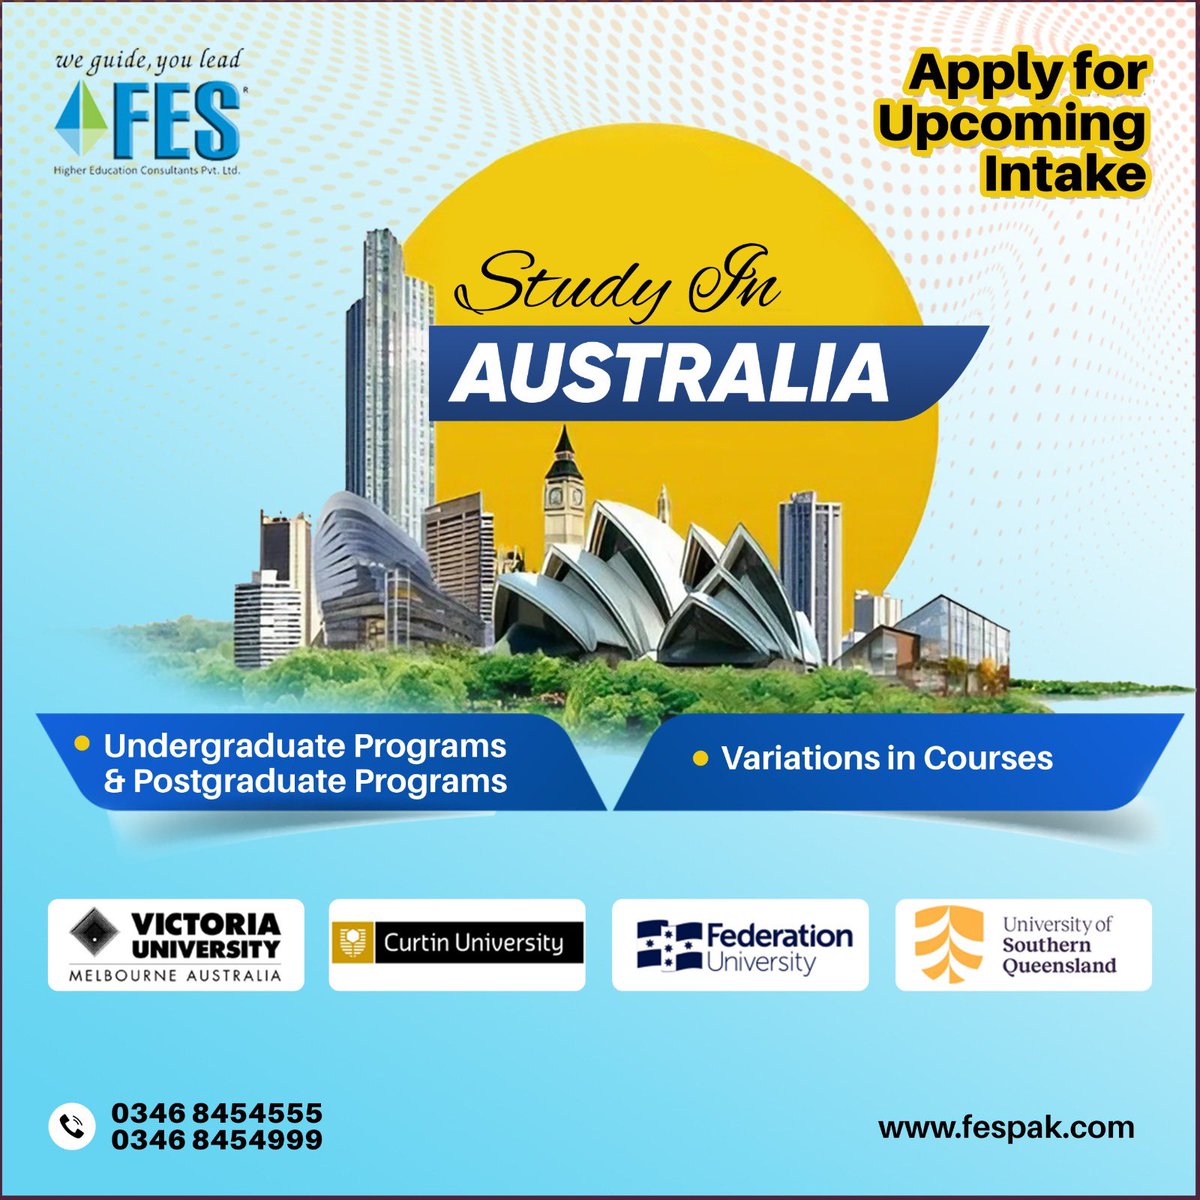 Regret-free decisions start with exploring new options. Discover top universities and courses in Australia with expert guidance from FES now.

For More Info
0346 8454555
0346 8454999

We Guide You Lead
fespak.com

#FES #FES2024 #StudyinAustralia #FESConsultants